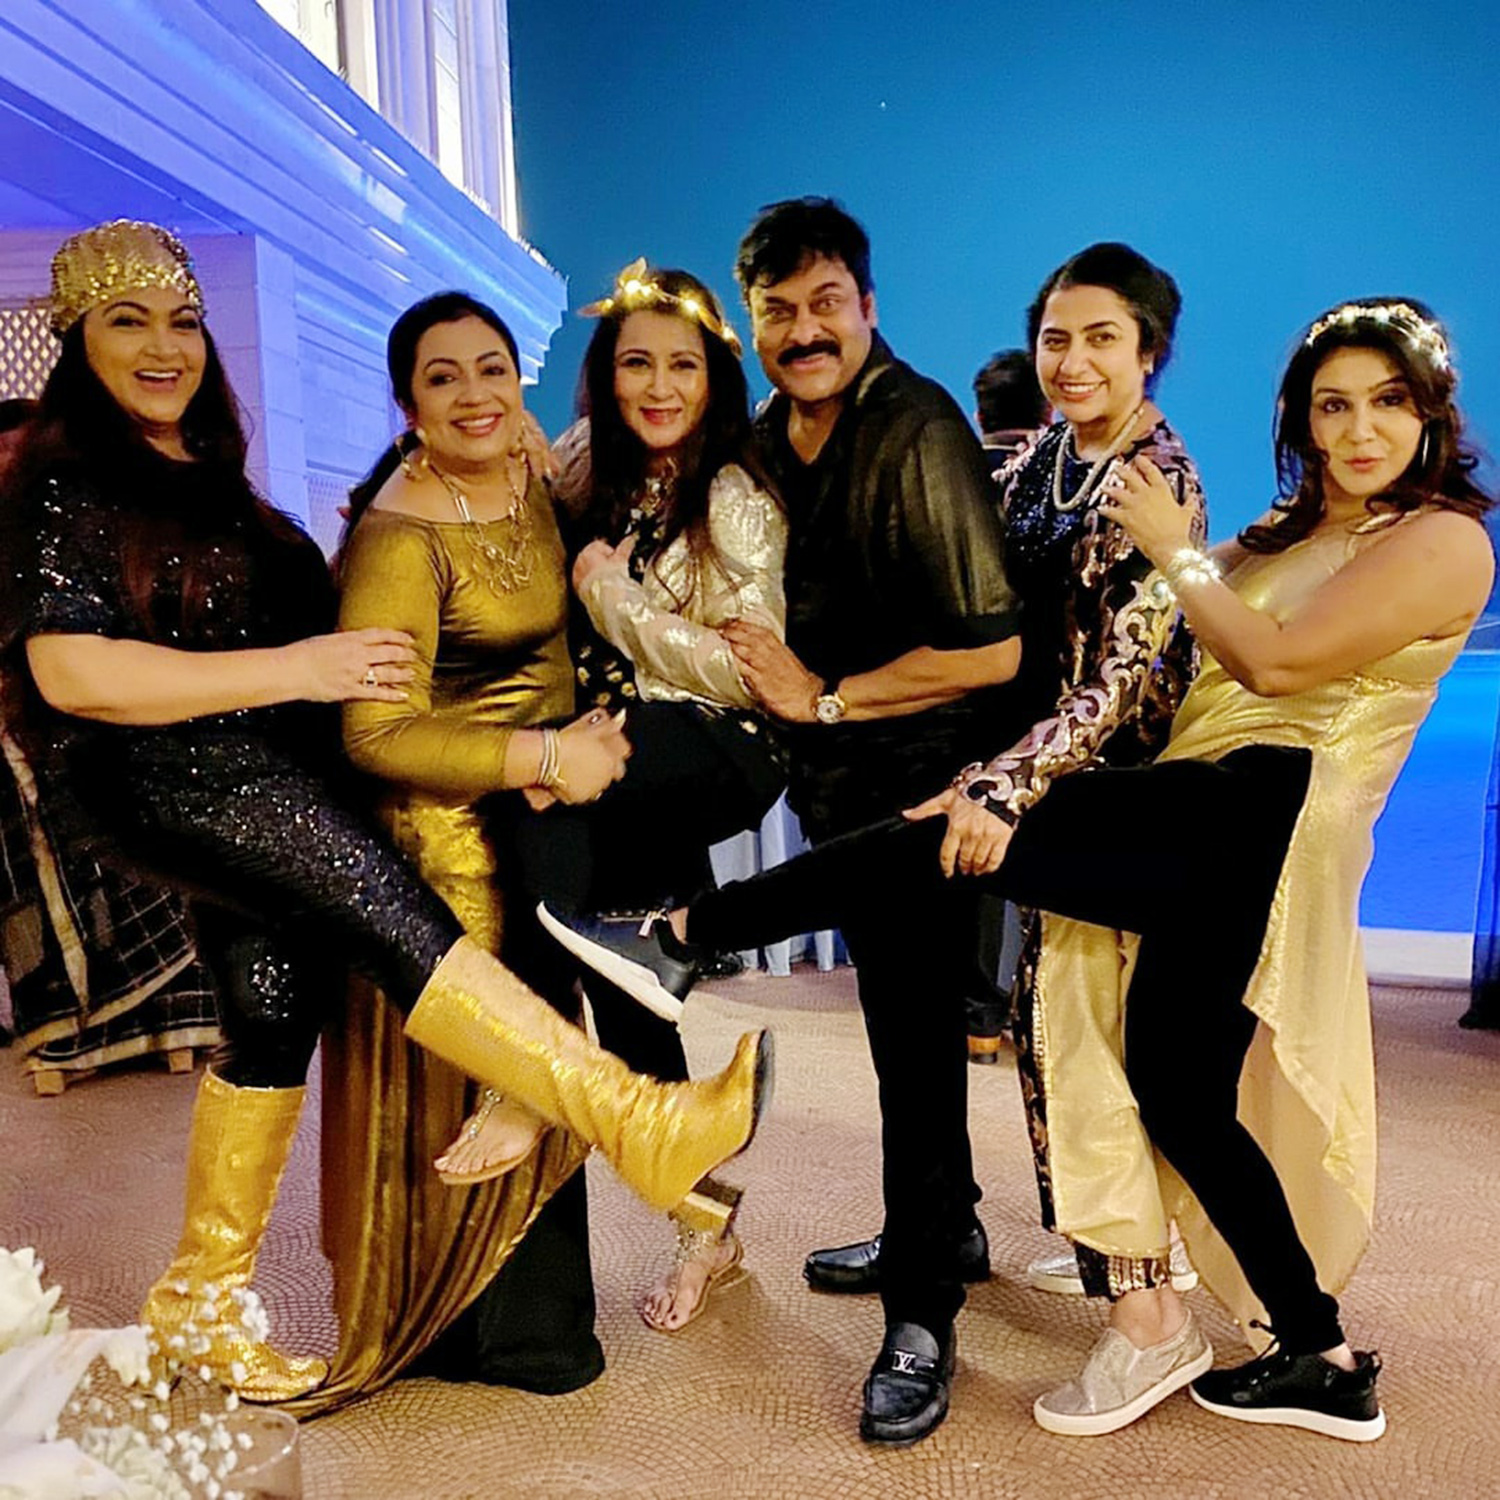 Chiranjeevi ,80's reunion,south indian film 80's reunion,80's stars reunion,80's reunion images,mohanlal chiranjeevi pics from 80's reunion,80's reunion party images